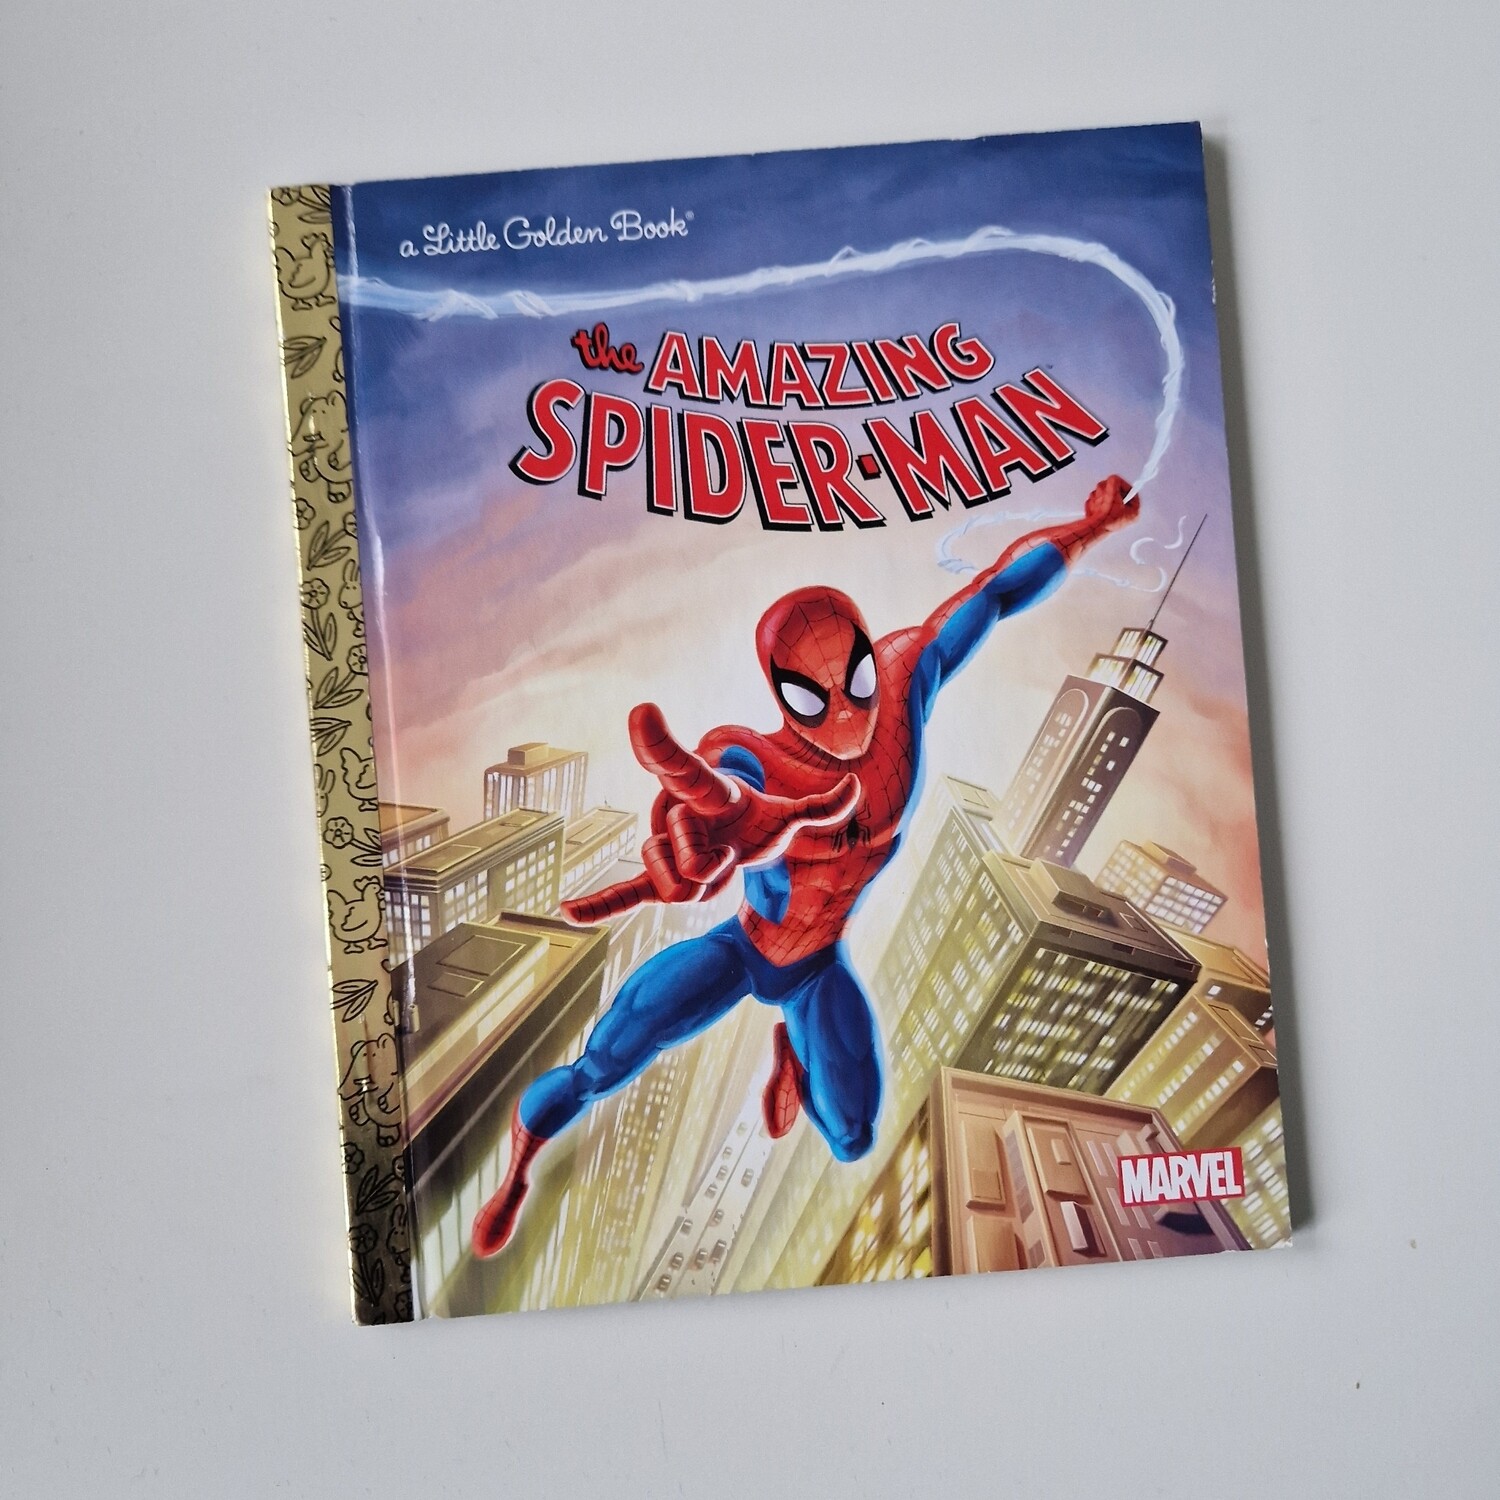 The Amazing Spiderman Notebook - board book will come with metal book corners included